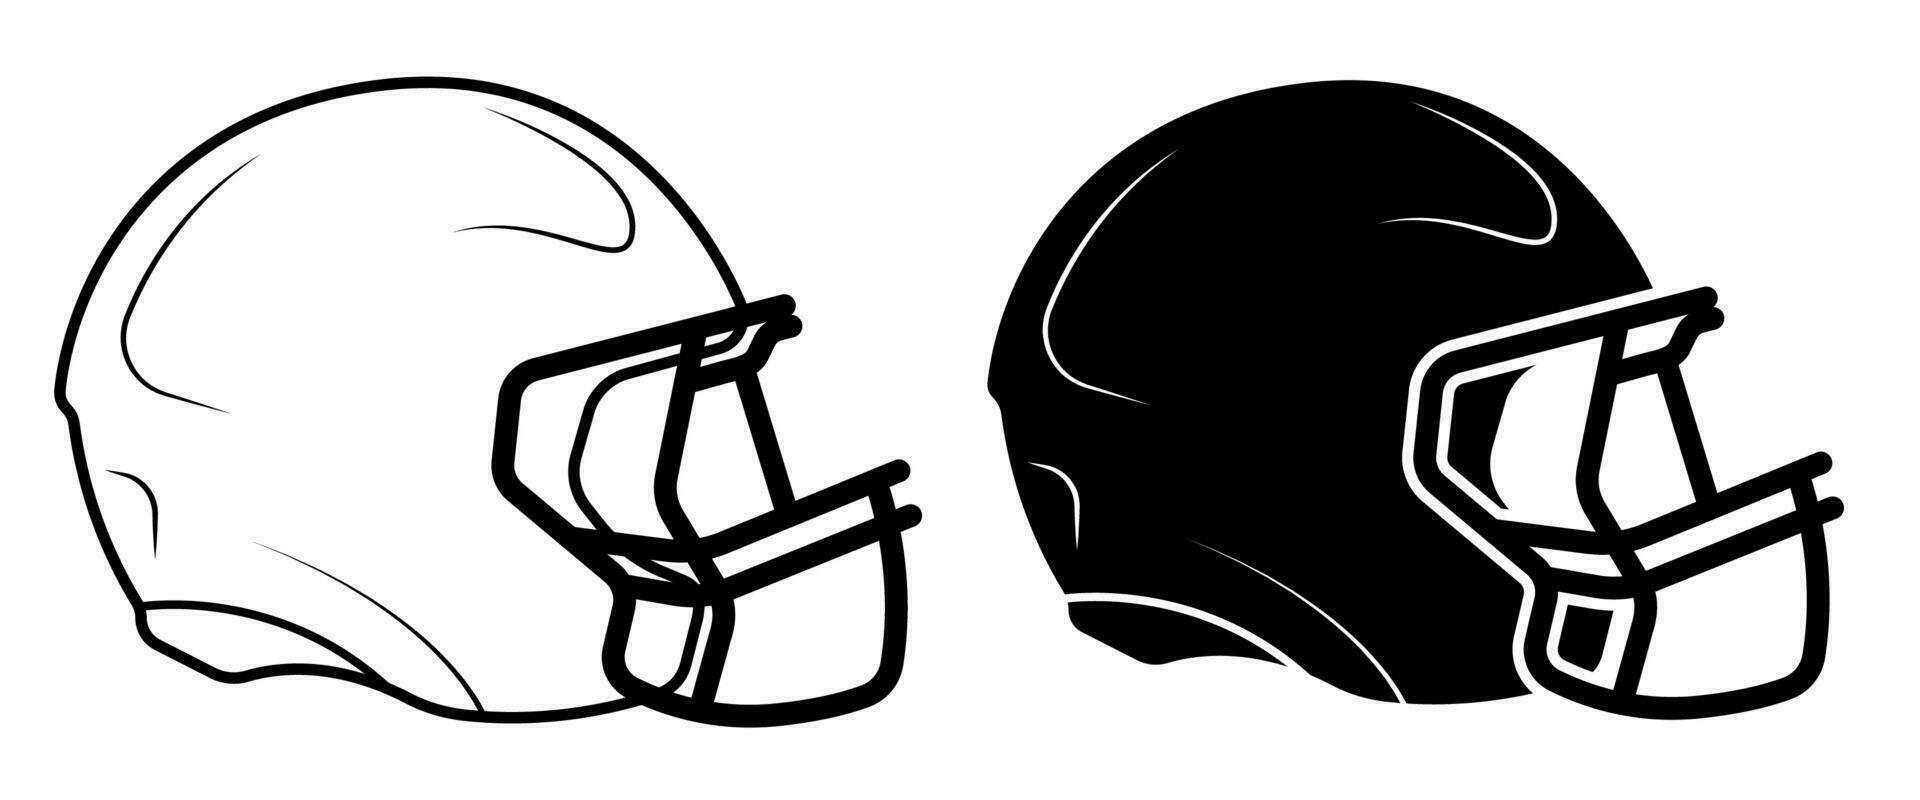 safety helmet icon with grille mask for playing American football. Protecting the athlete from injury. Black and white vector